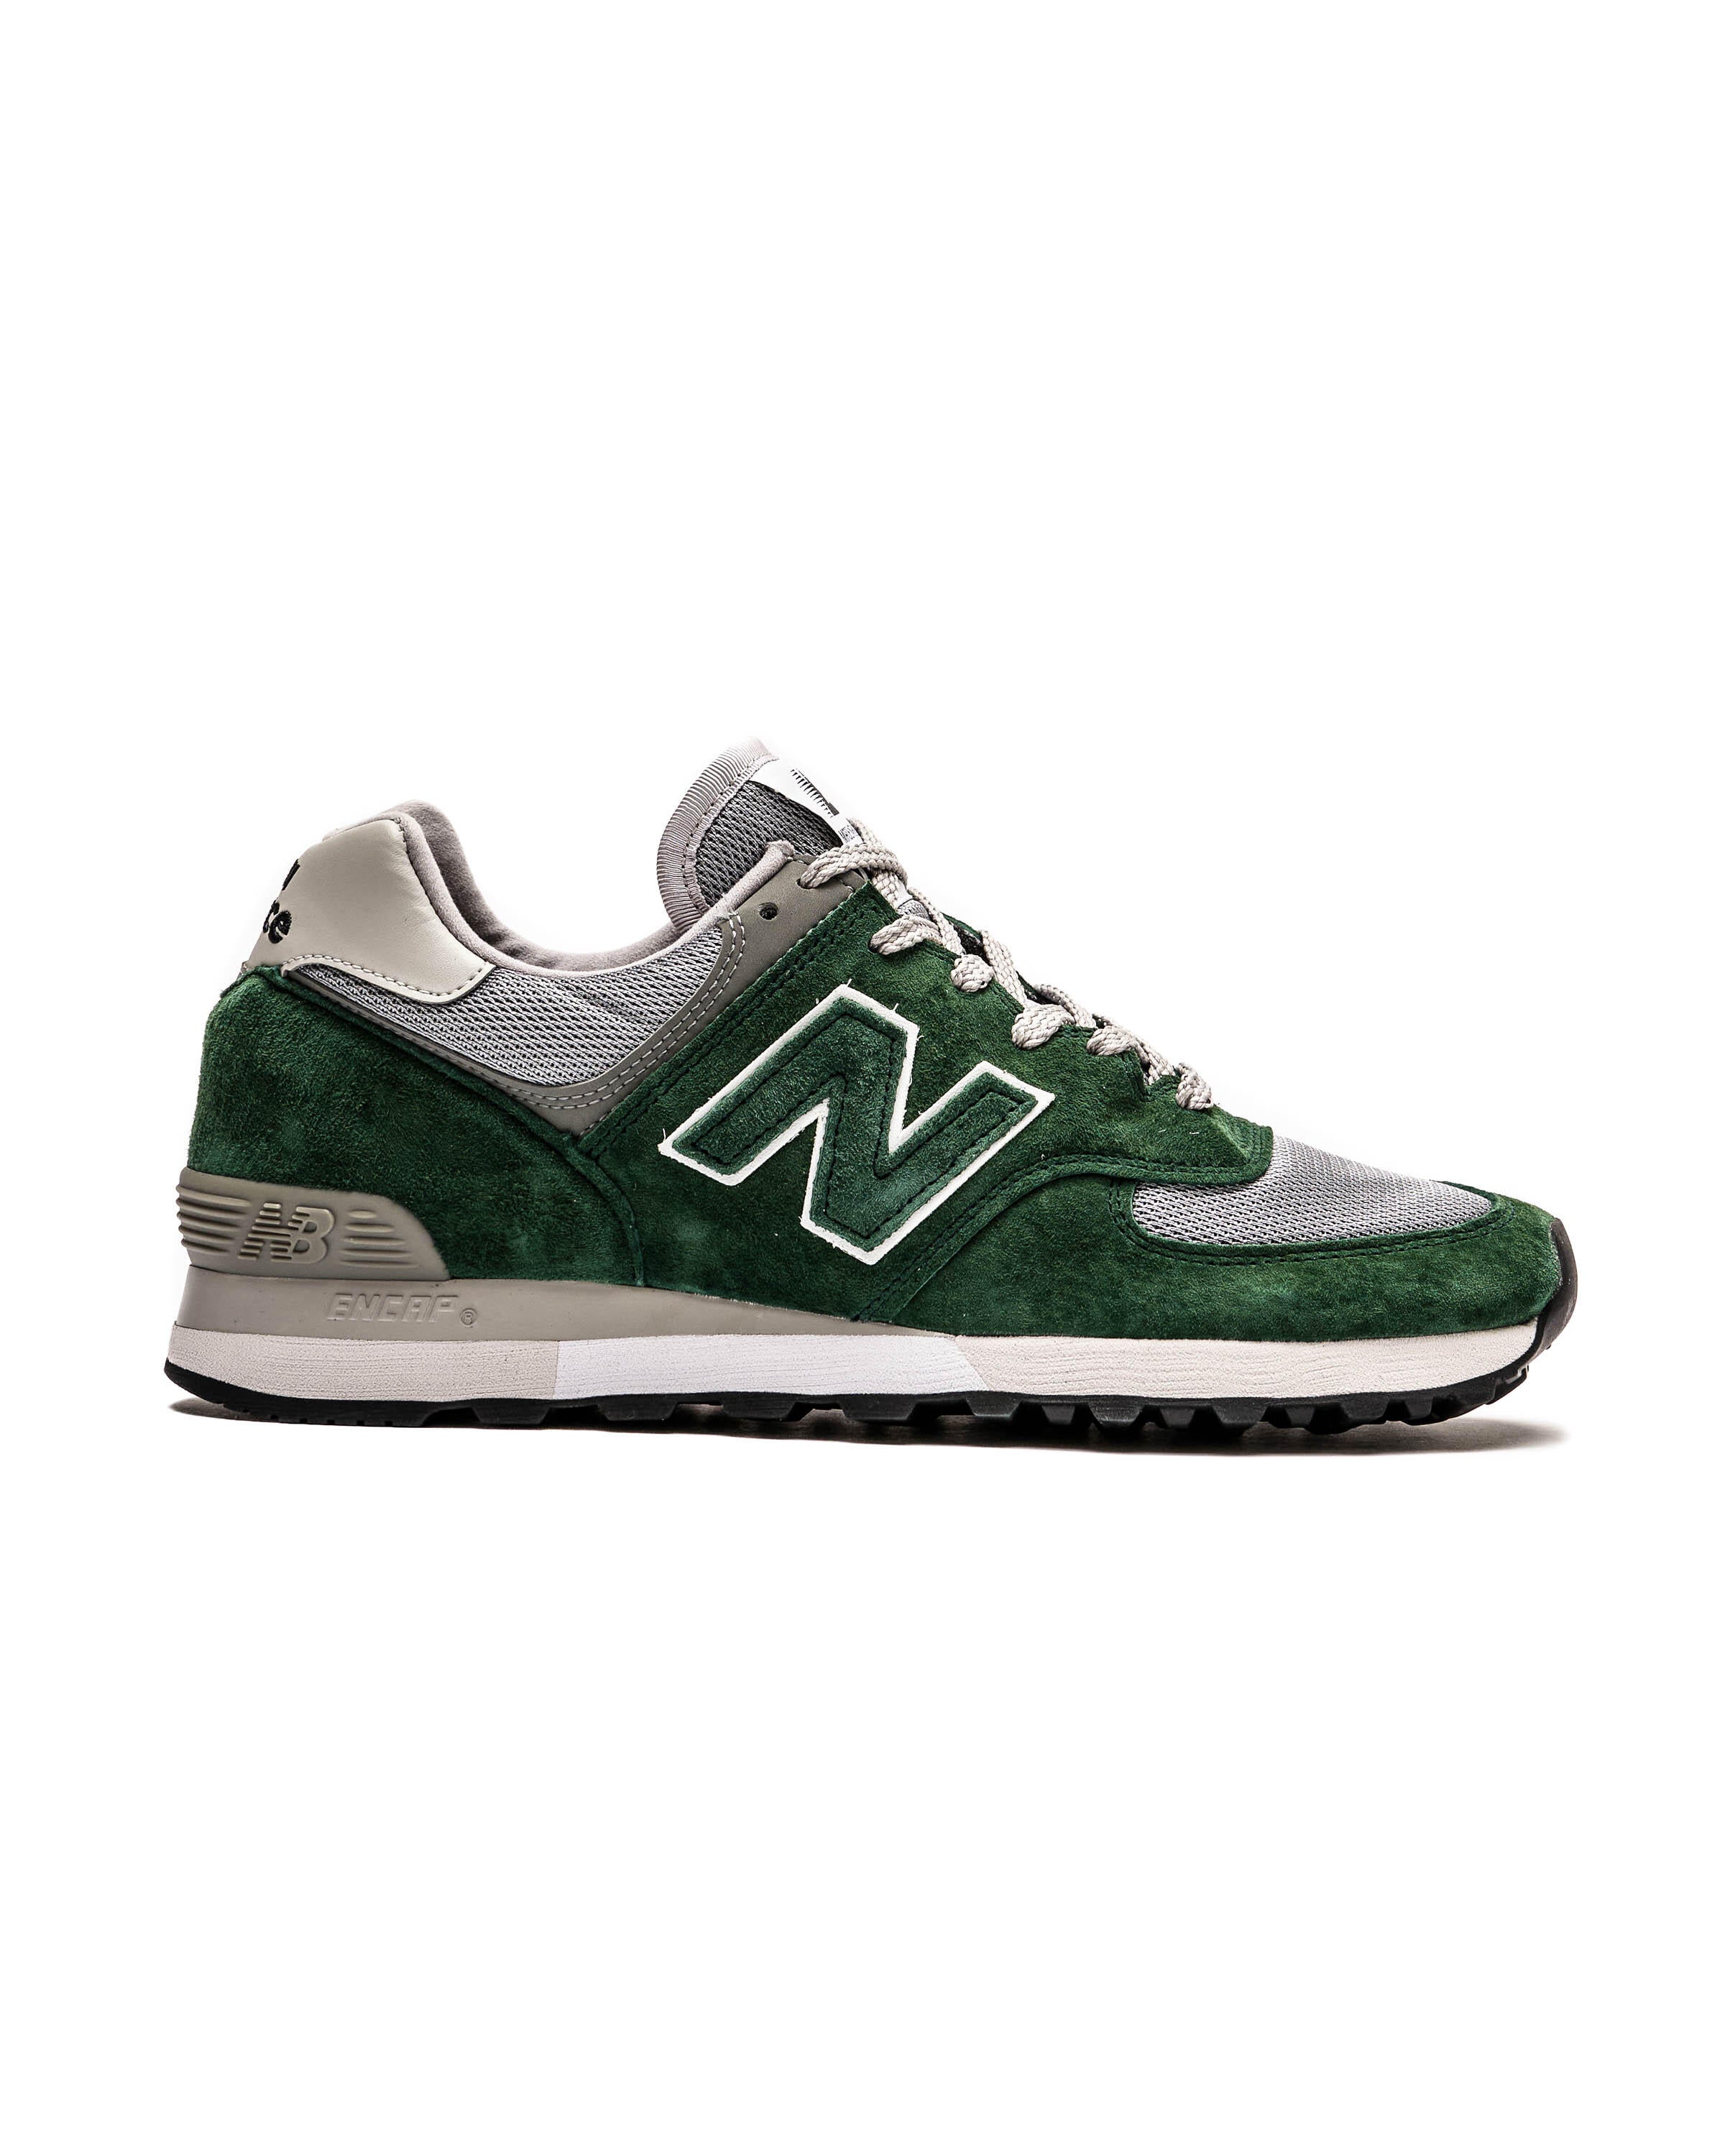 New Balance OU 576 FLB - Made in England | OU576FLB | AFEW STORE